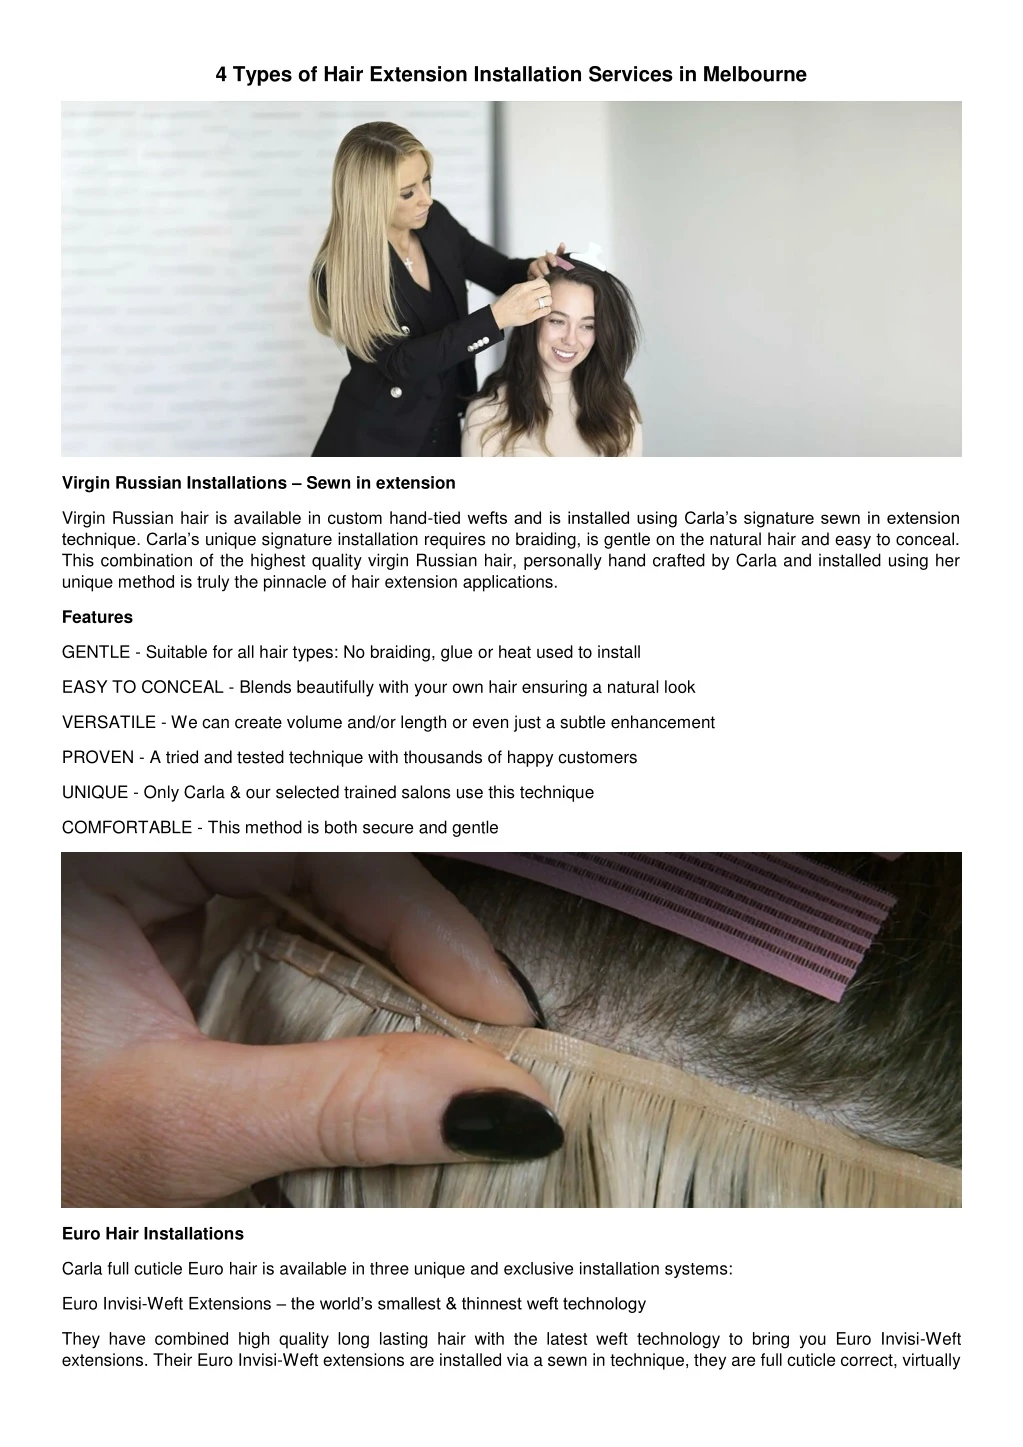 4 types of hair extension installation services